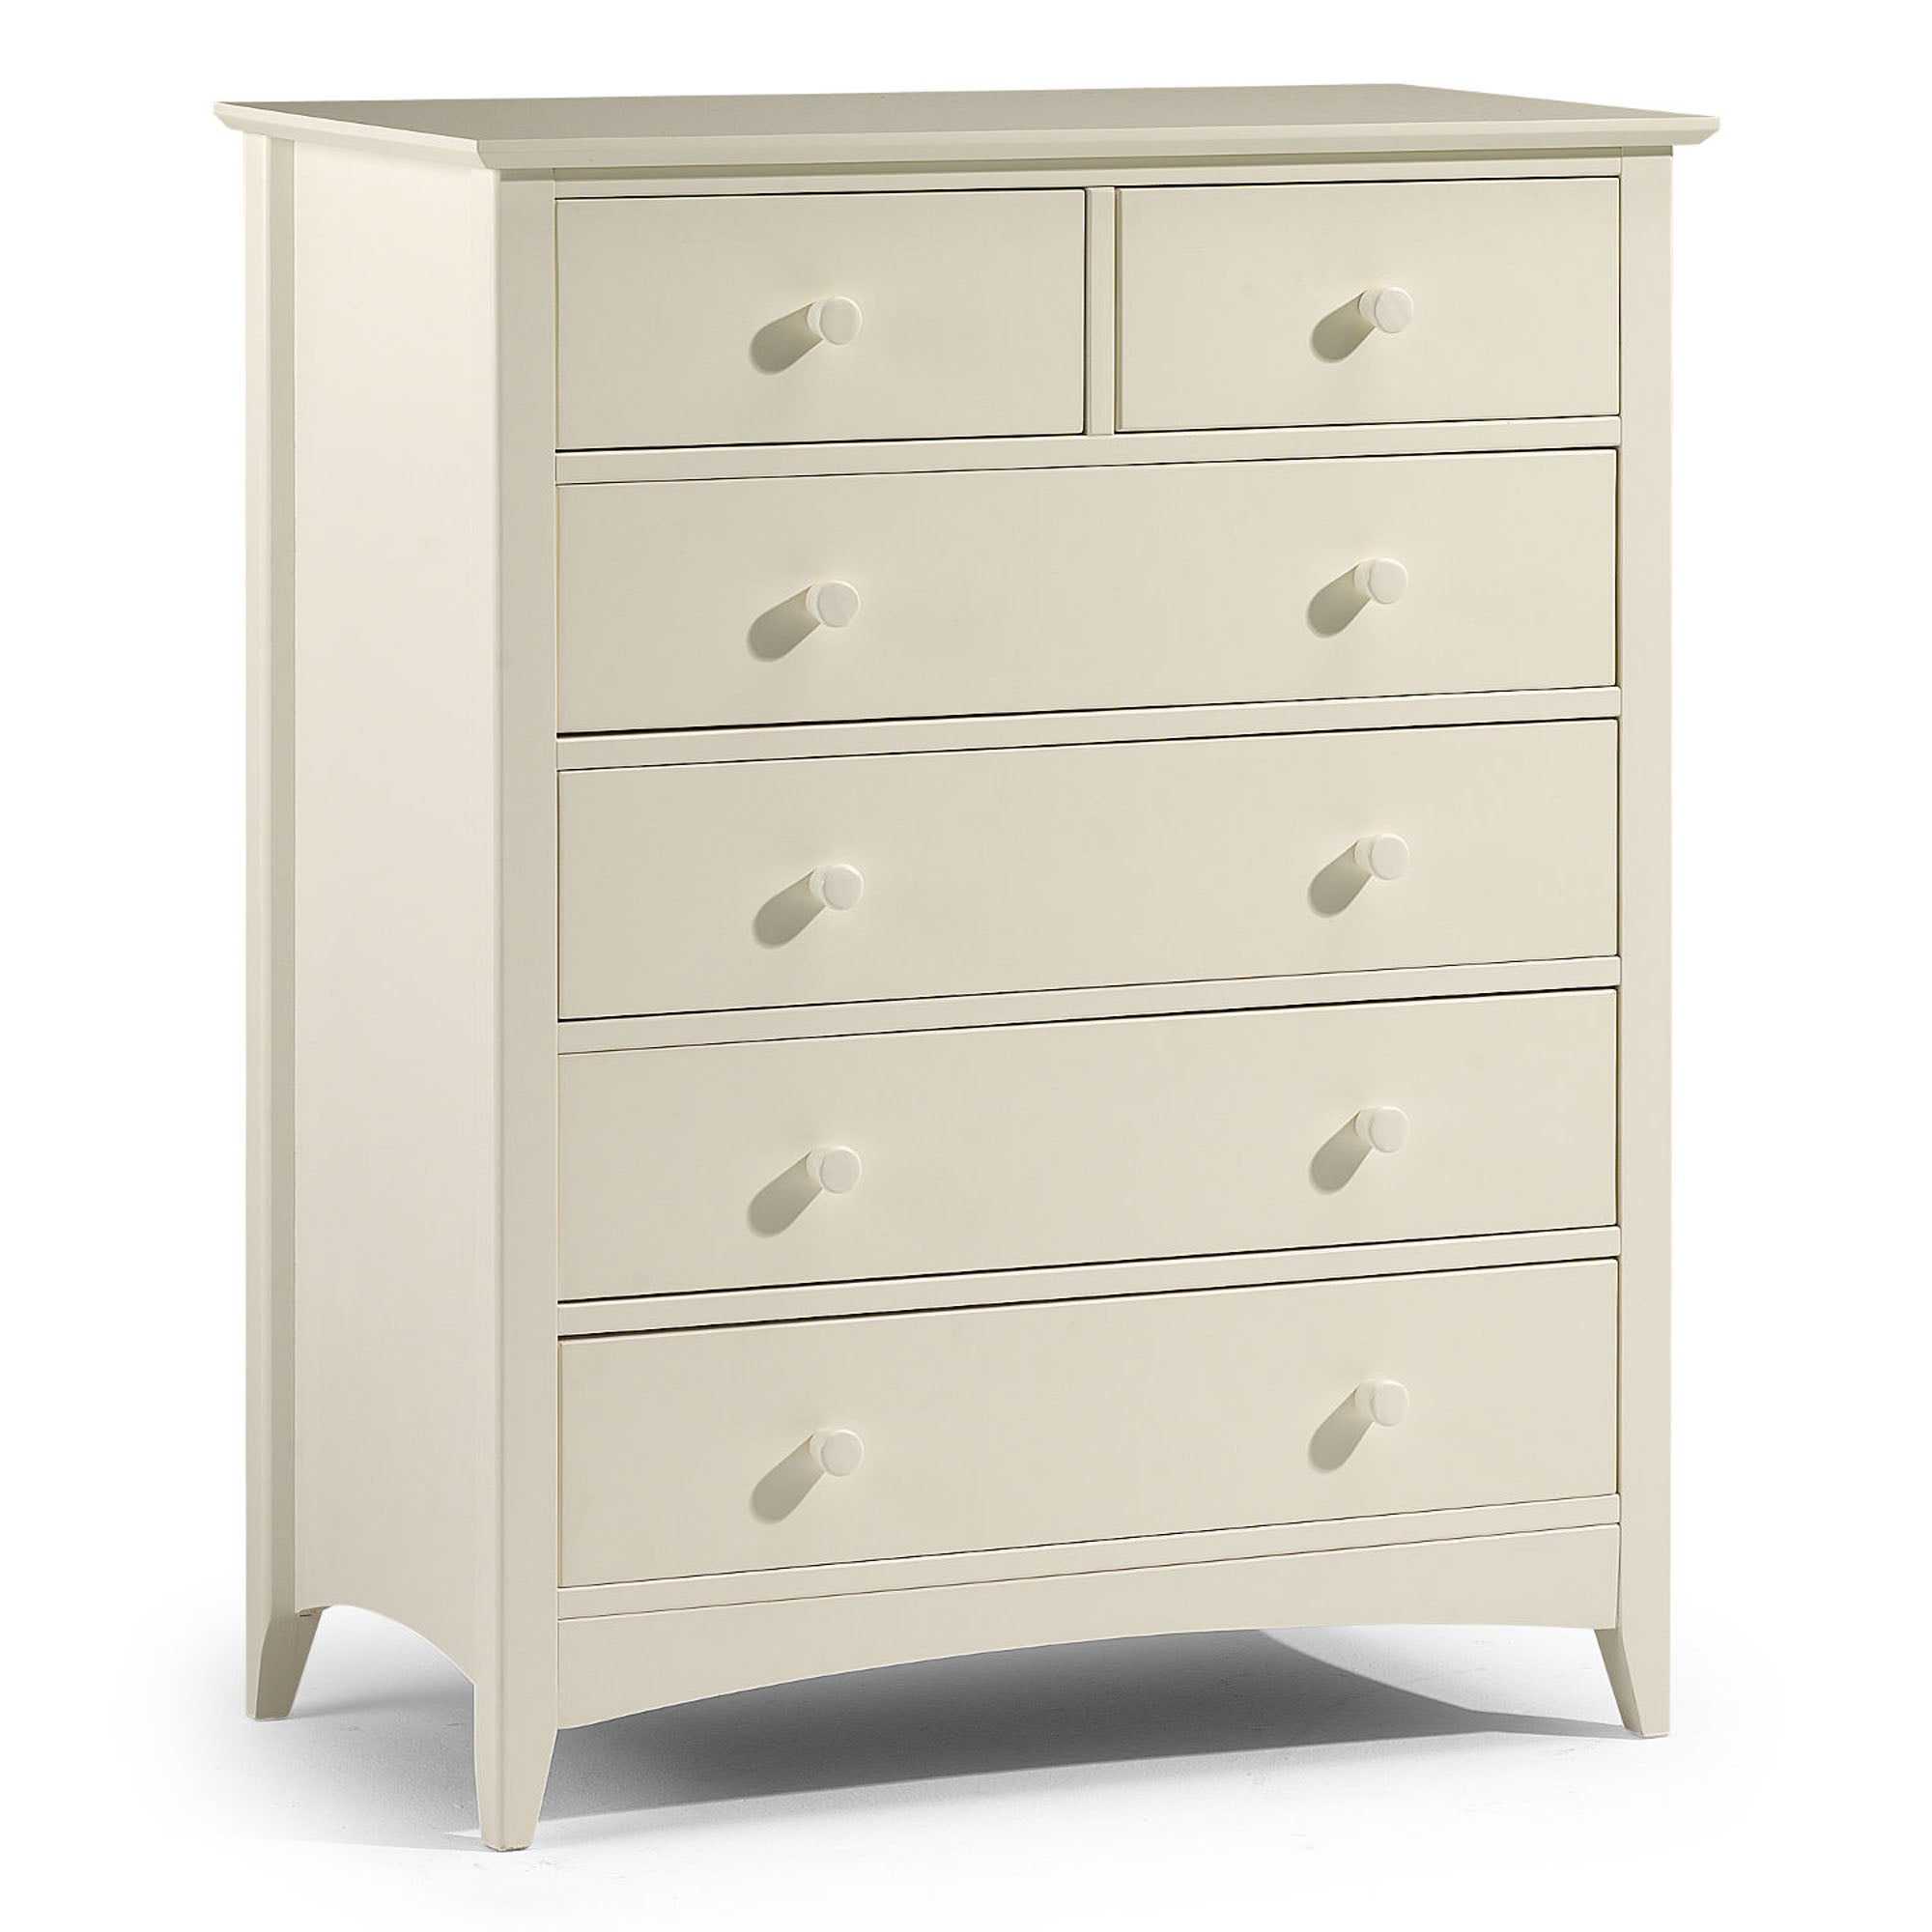 Cameo 6 Drawer Chest, Stone